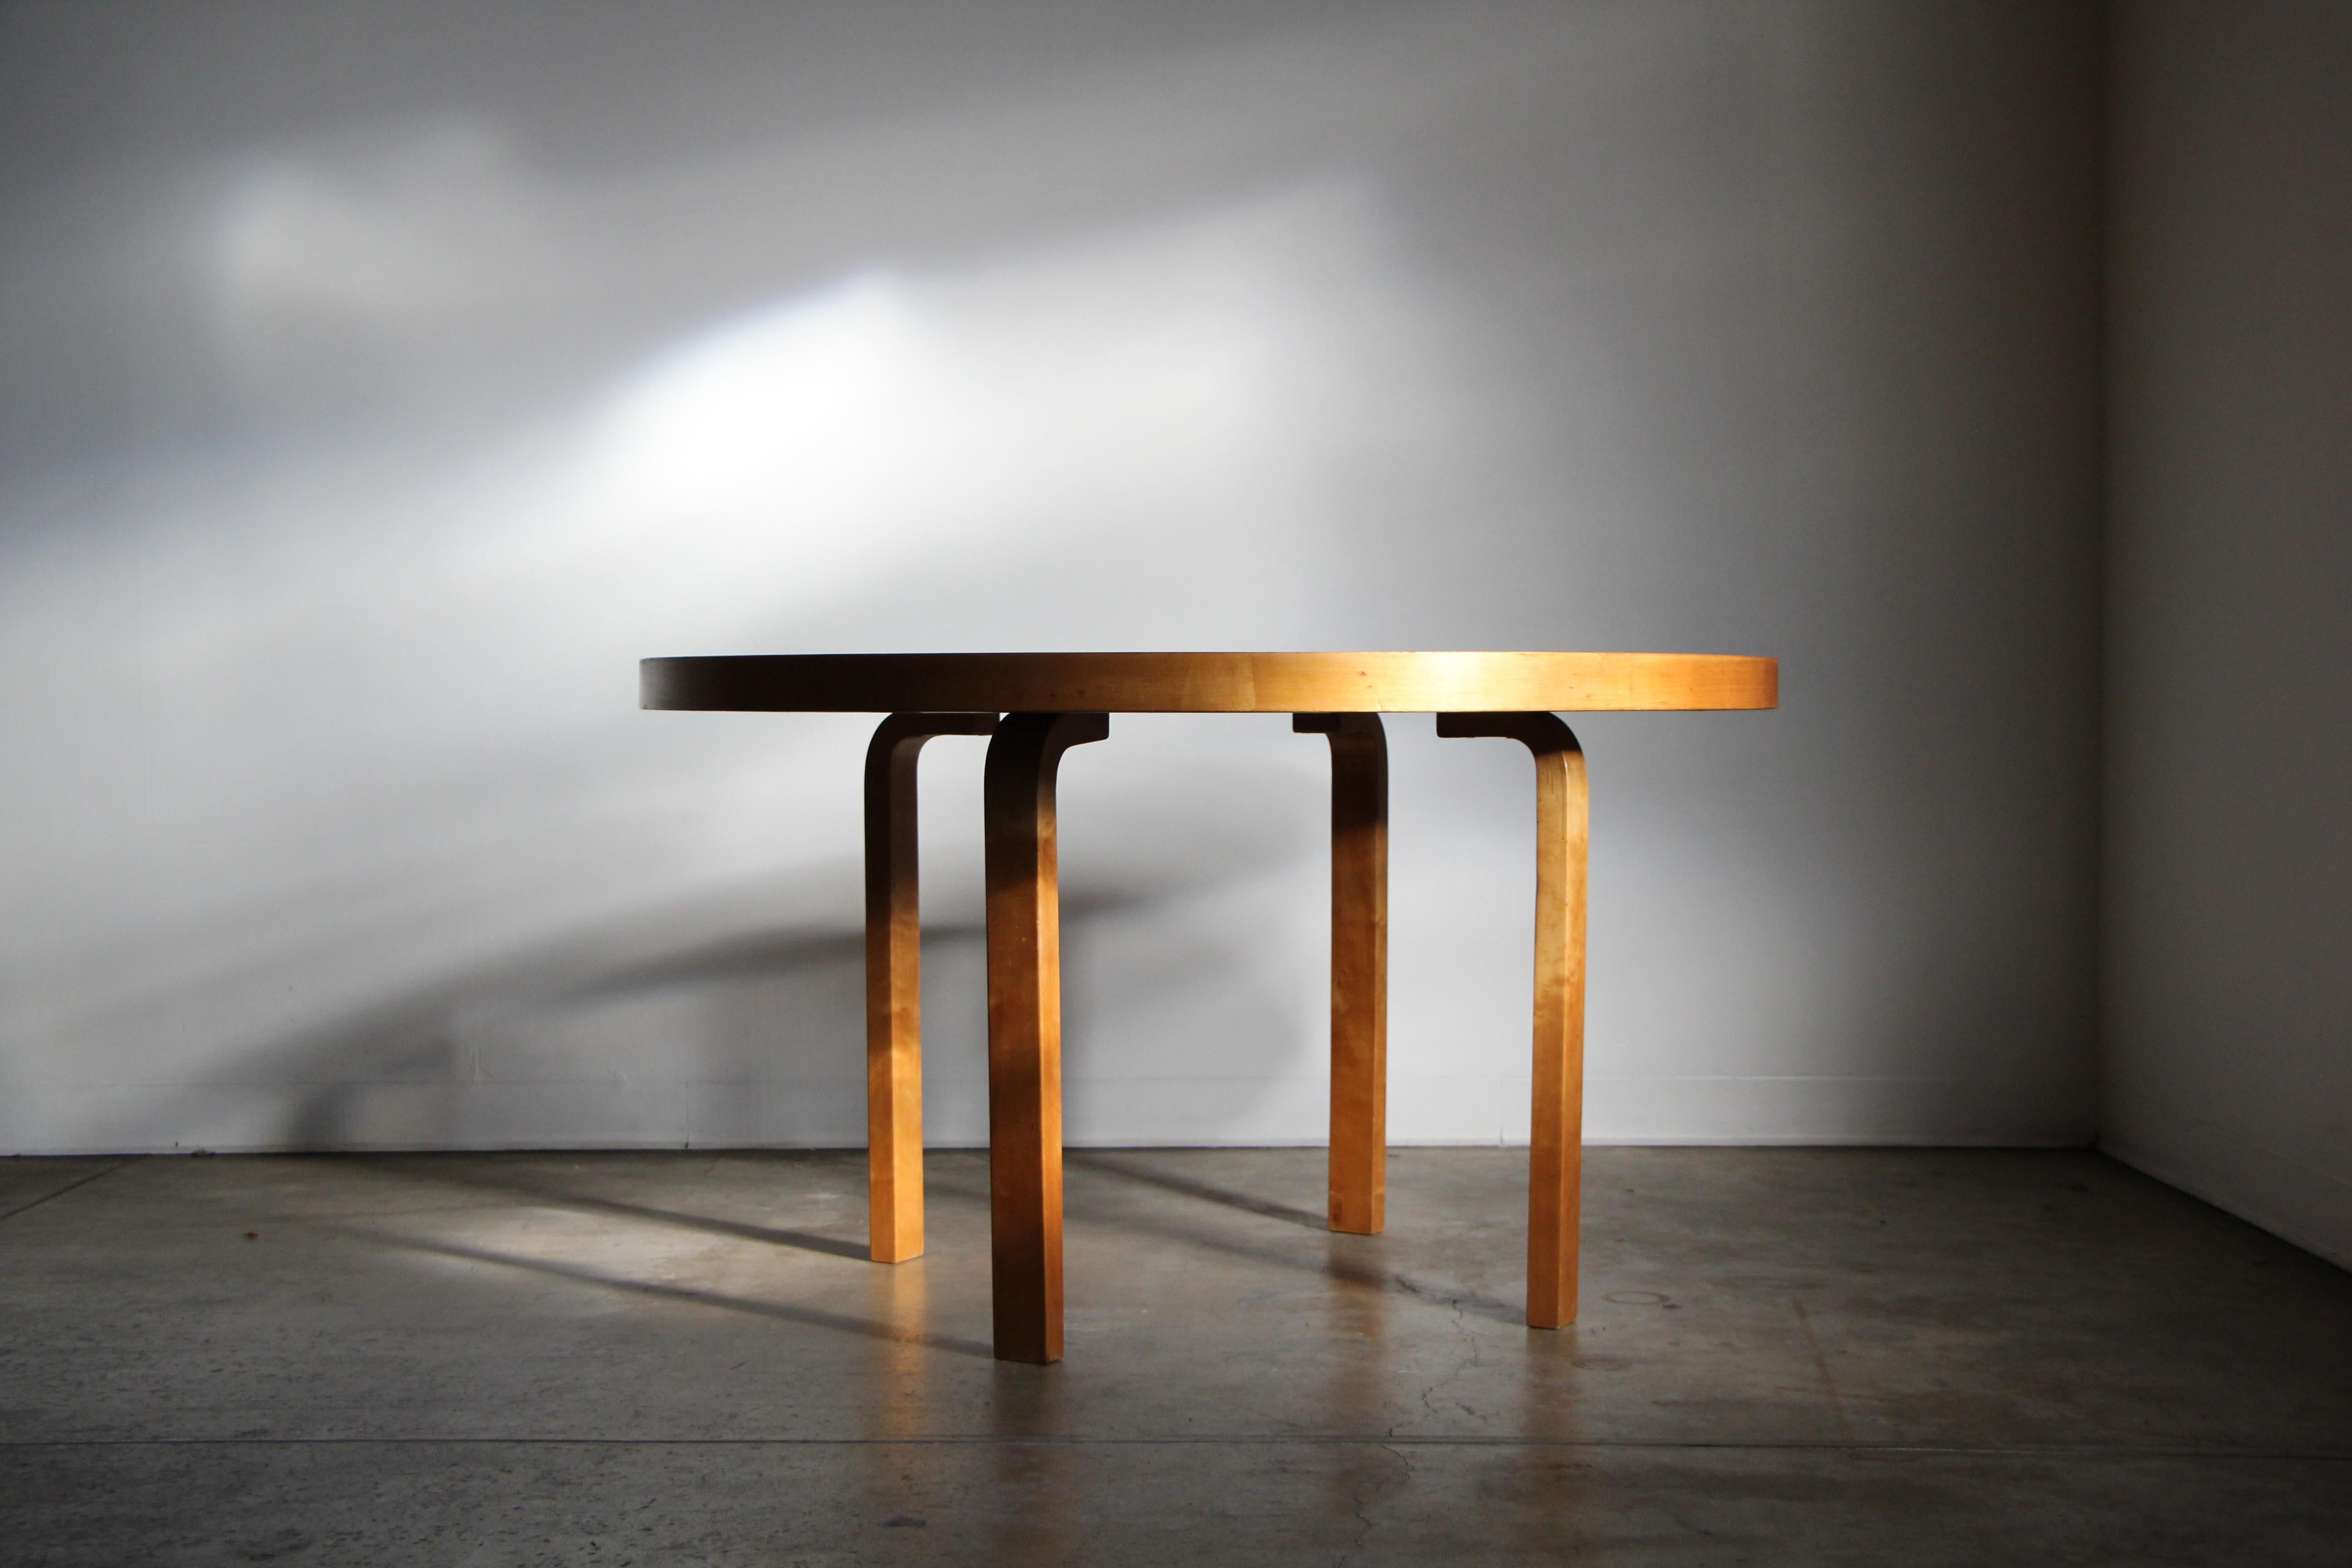 A beautiful 1930s dining table by Alvar Aalto for Finmar, executed in Birch plywood with L-legs. This stunning early example is in excellent condition, recently cleaned up with some lovely age-related patina. The wood has a lovely golden color, and